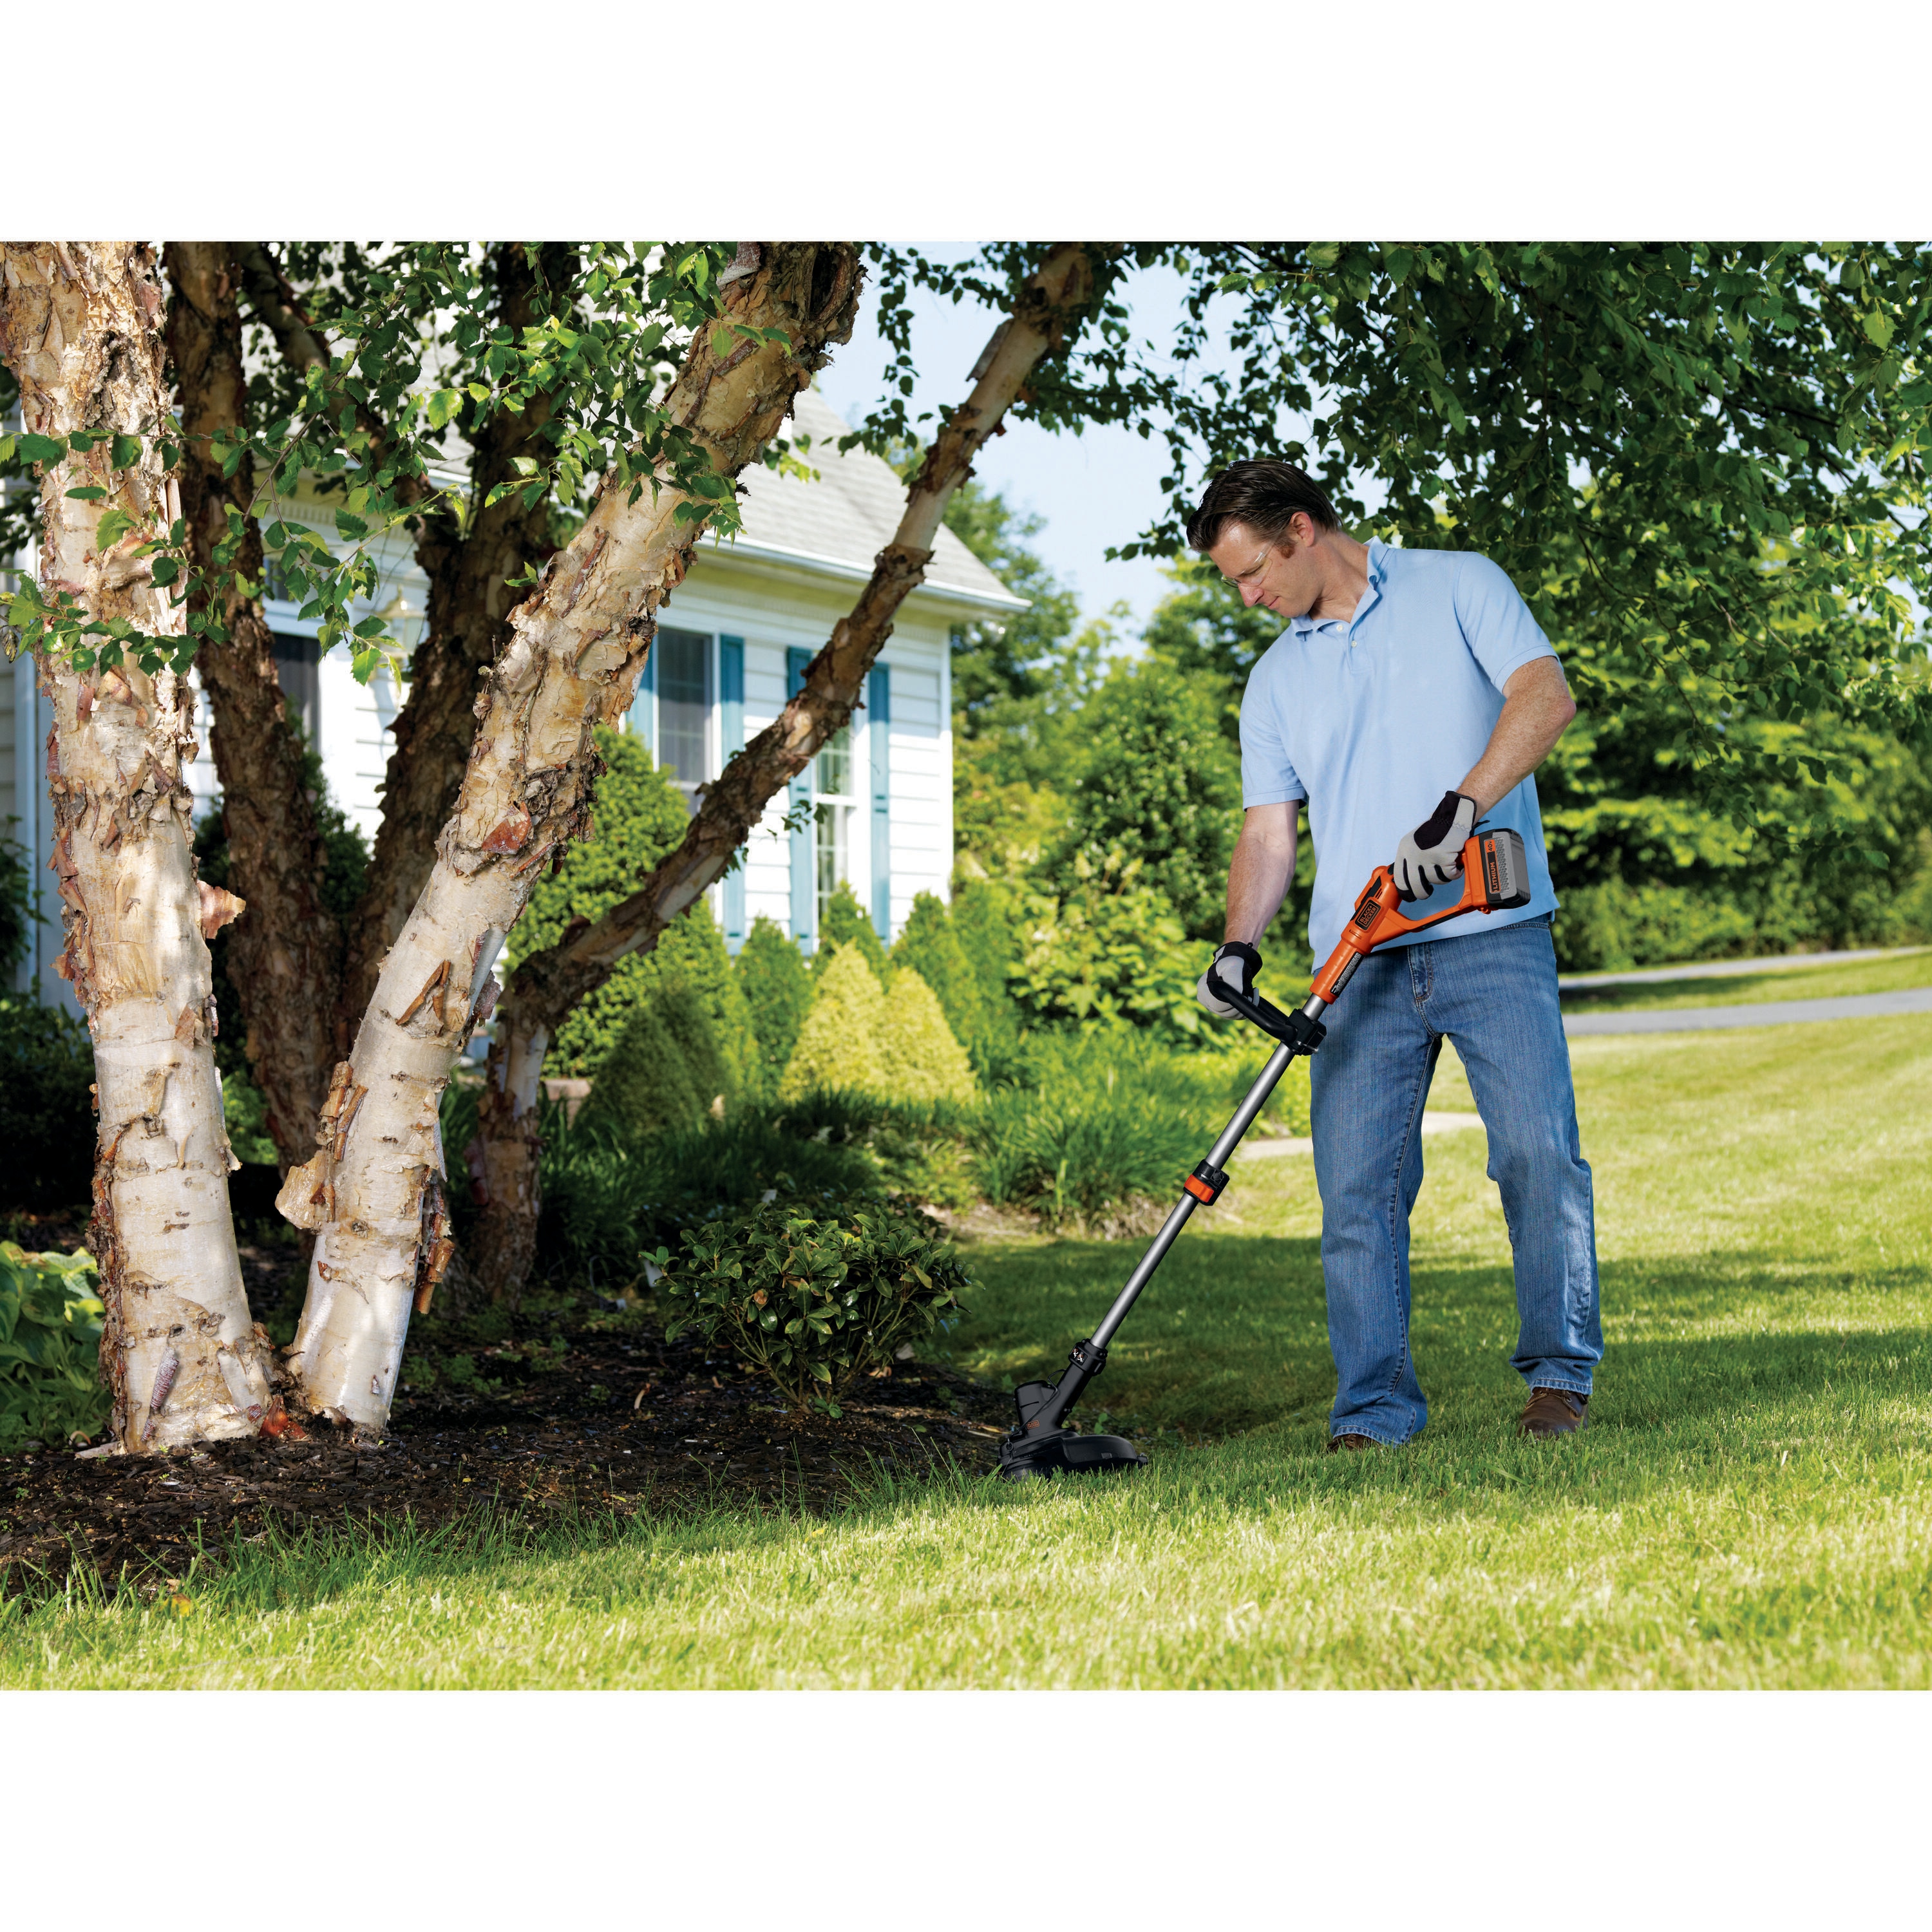 BLACK & DECKER 40-volt Max 13-in Straight Battery String Trimmer with Edger  Conversion Capable 2.4 Ah (Battery and Charger Included) at